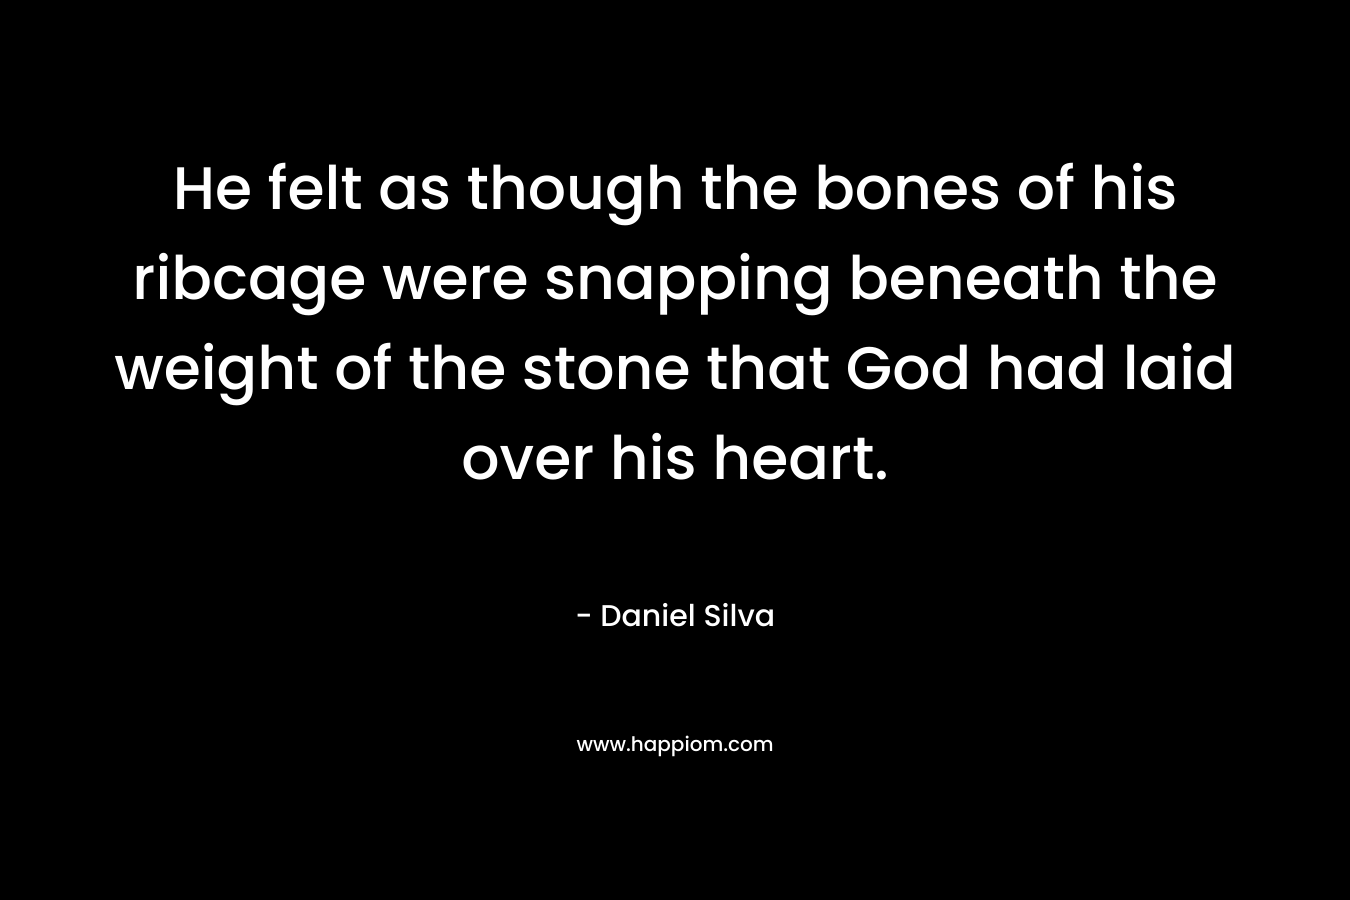 He felt as though the bones of his ribcage were snapping beneath the weight of the stone that God had laid over his heart. – Daniel Silva